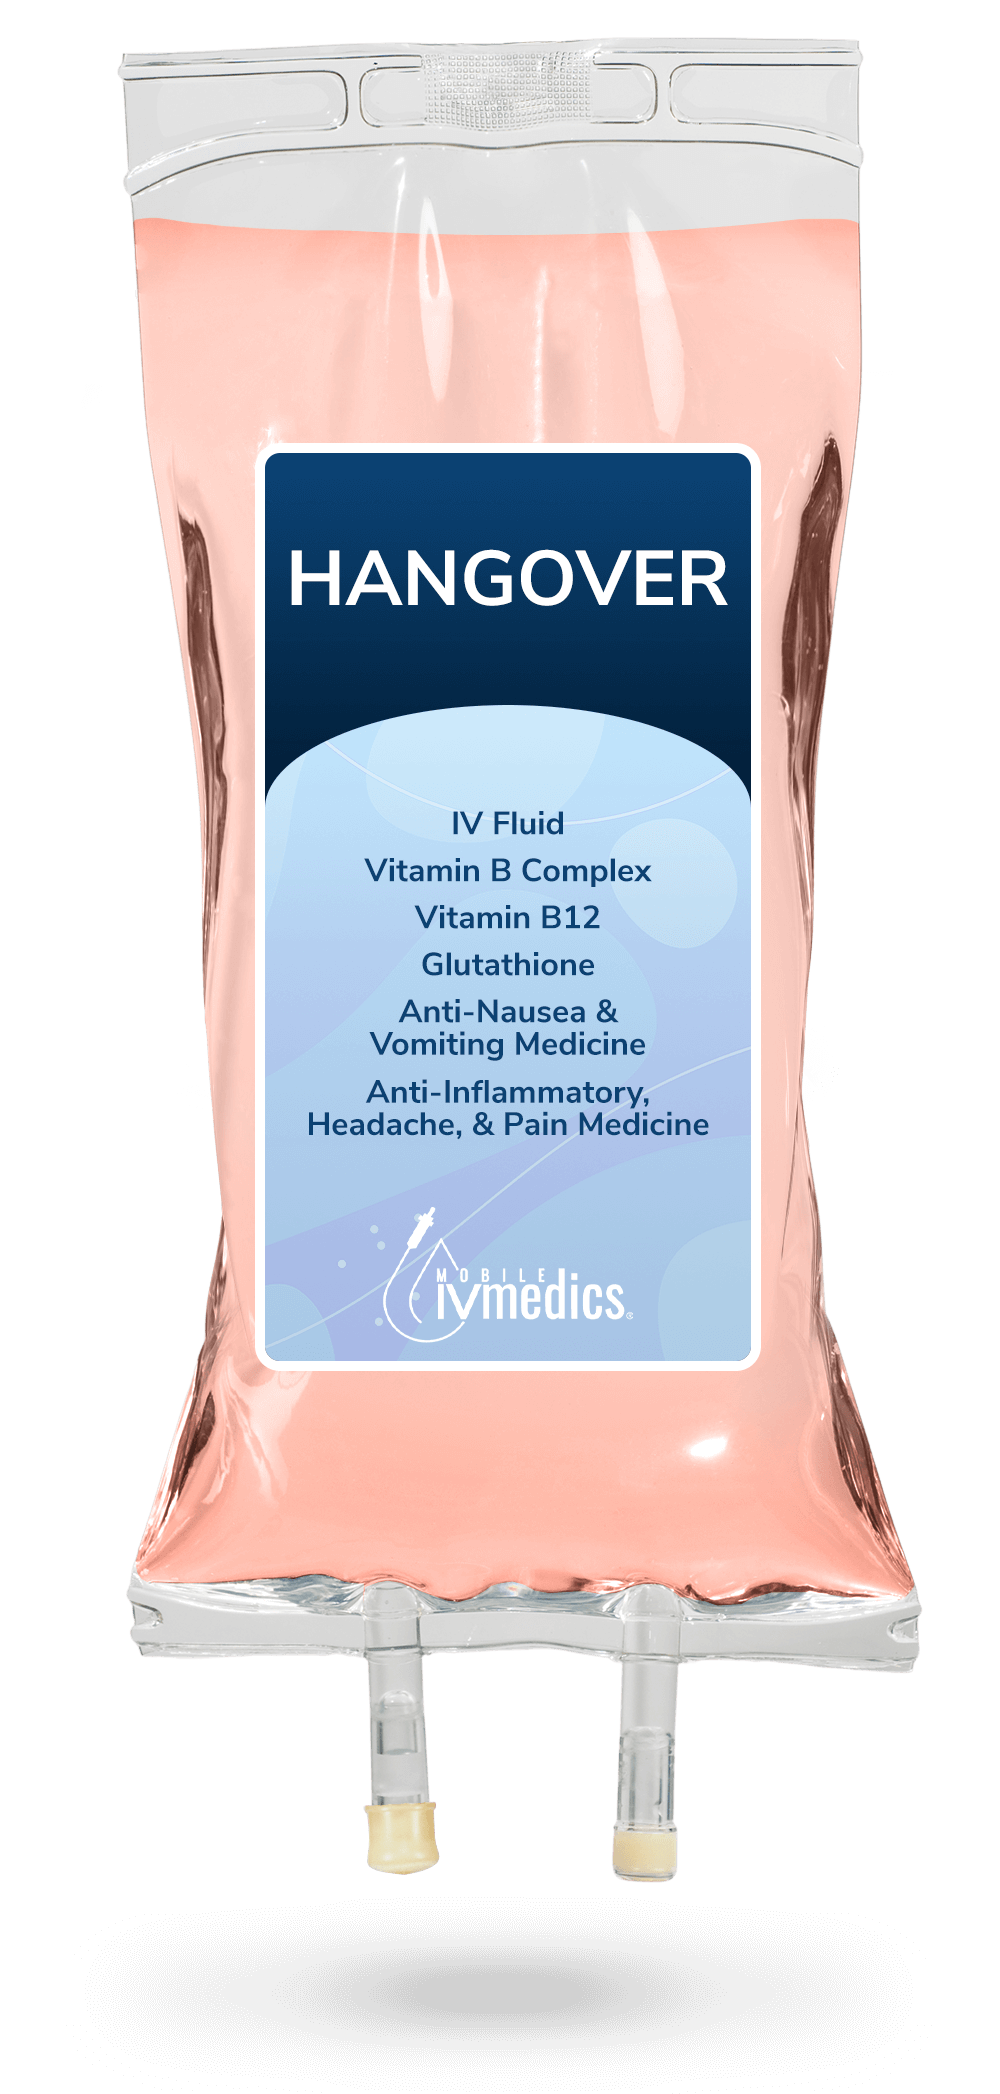 9 Drinks to Help Cure Your Hangover